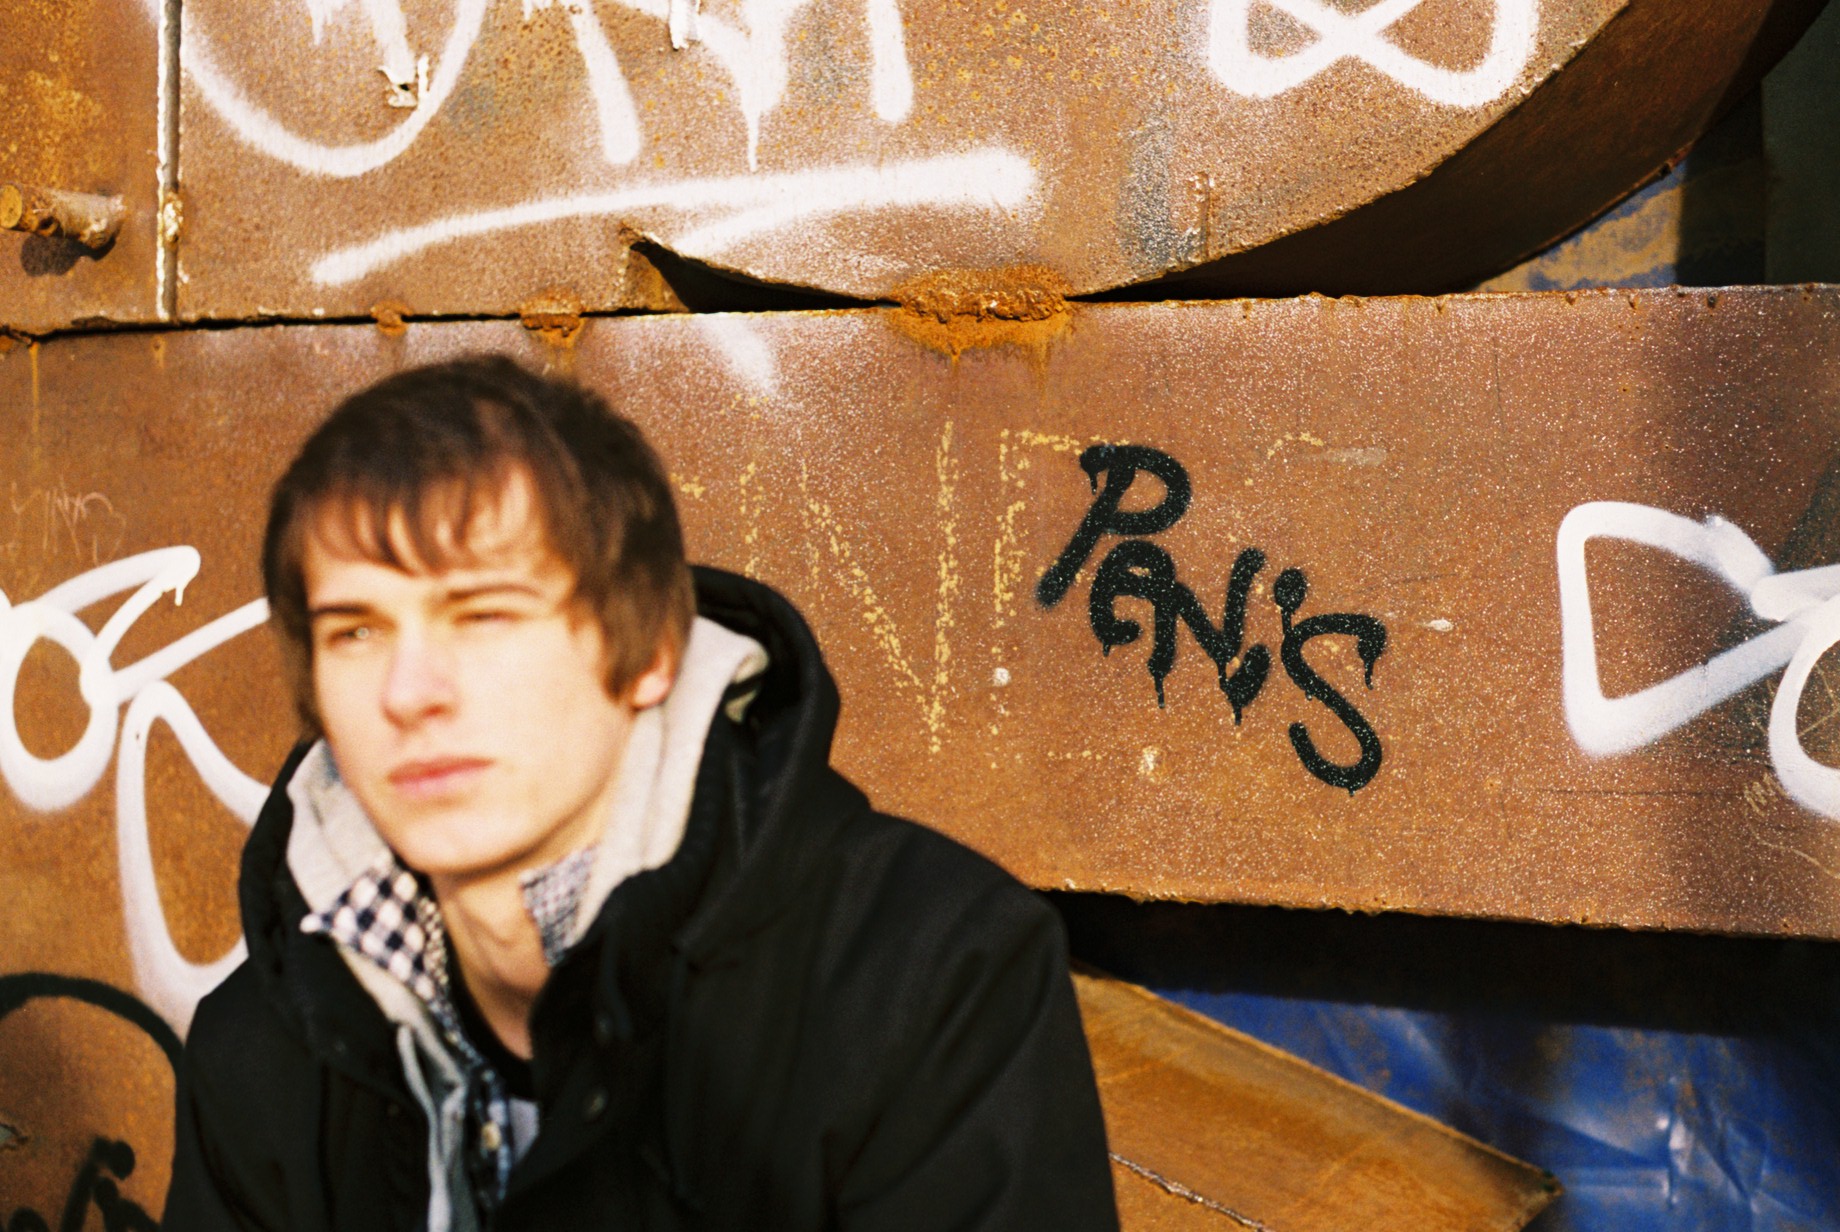 a young man with brown hair is standing in front of graffiti